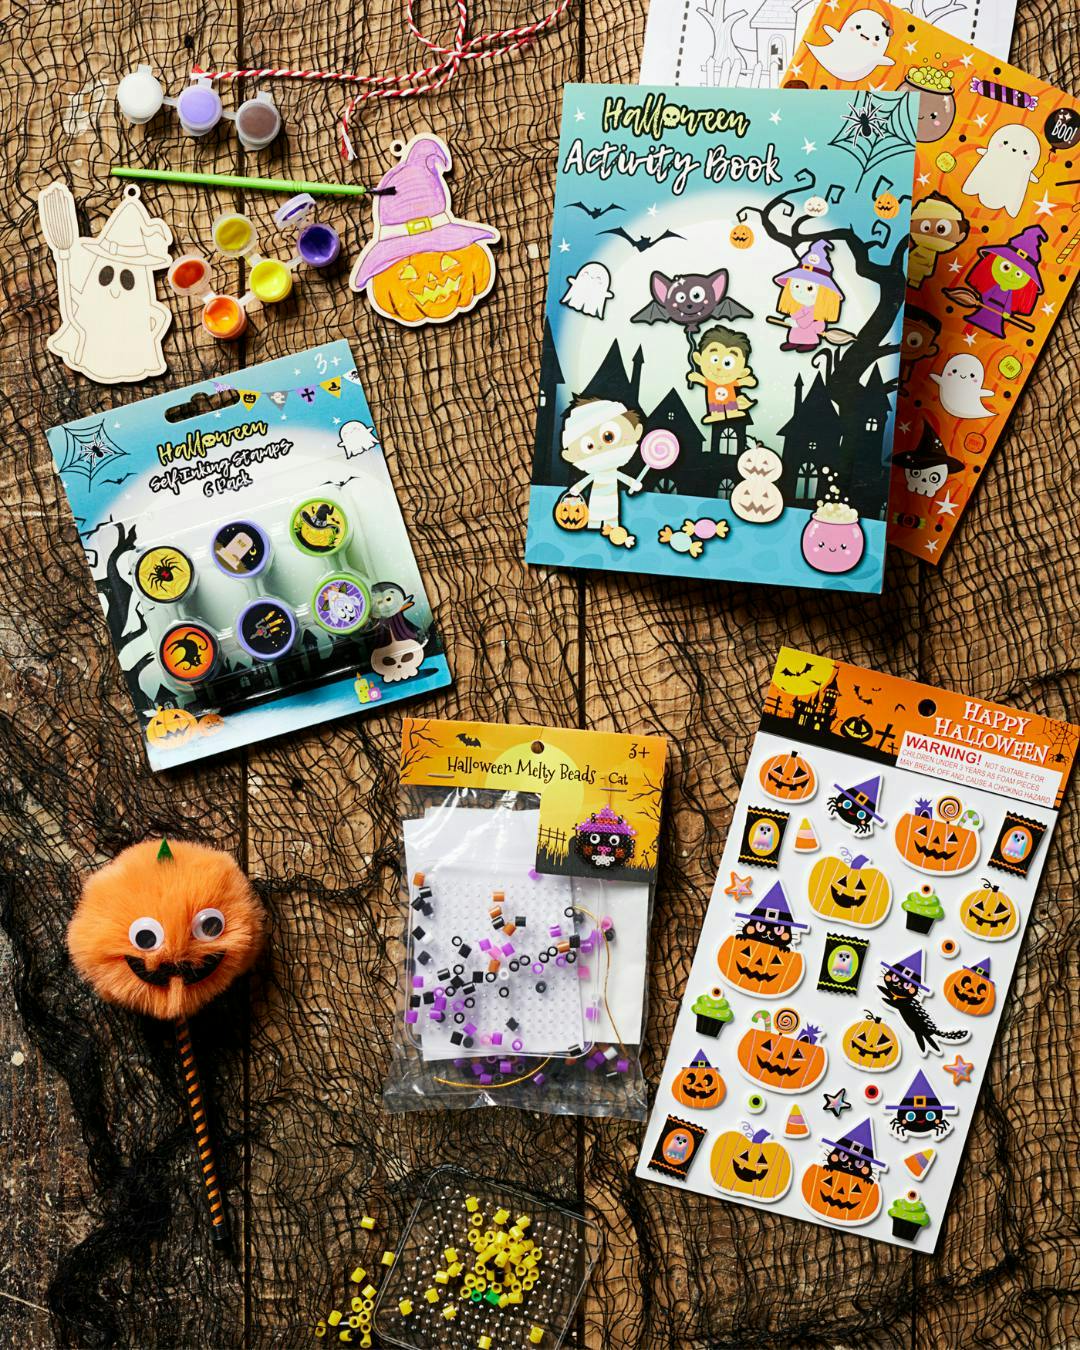 Décopatch extends its selection of Halloween products - Gifts Today